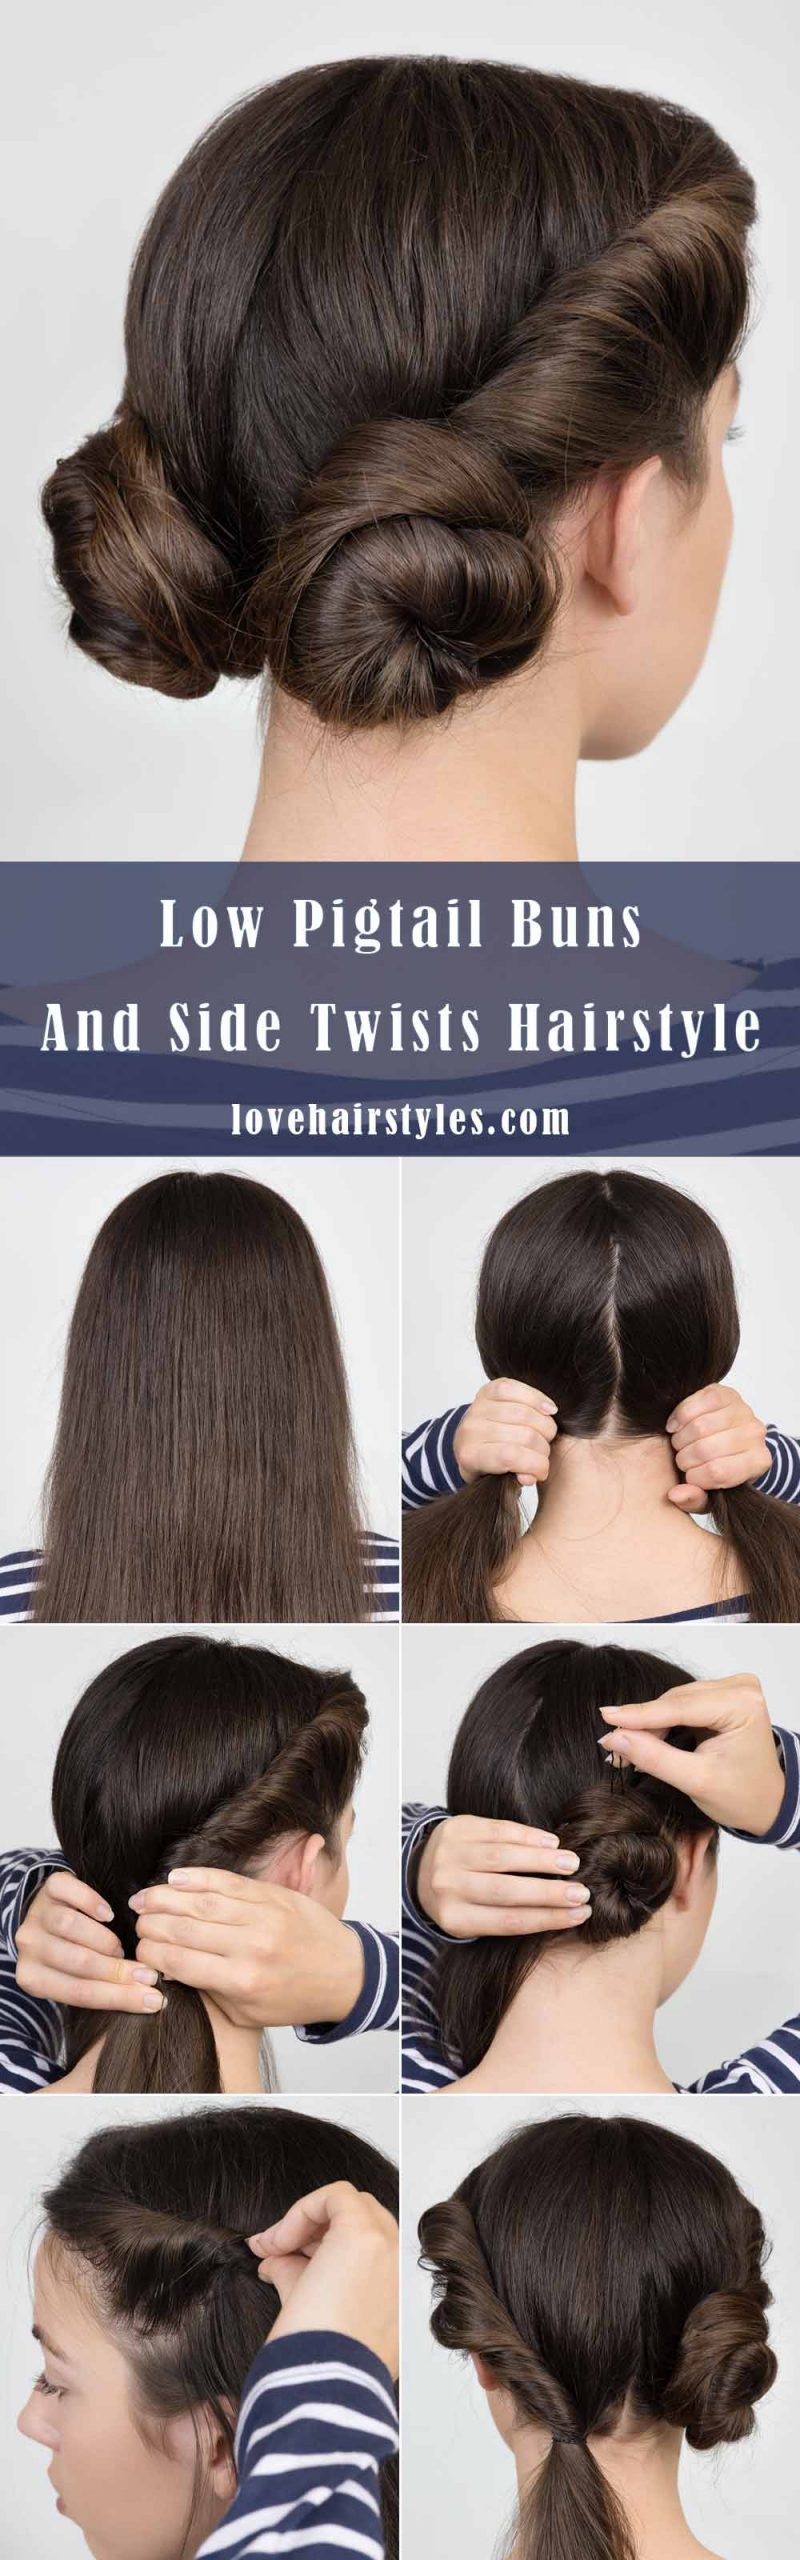 Low Pigtail Buns And Side Twists